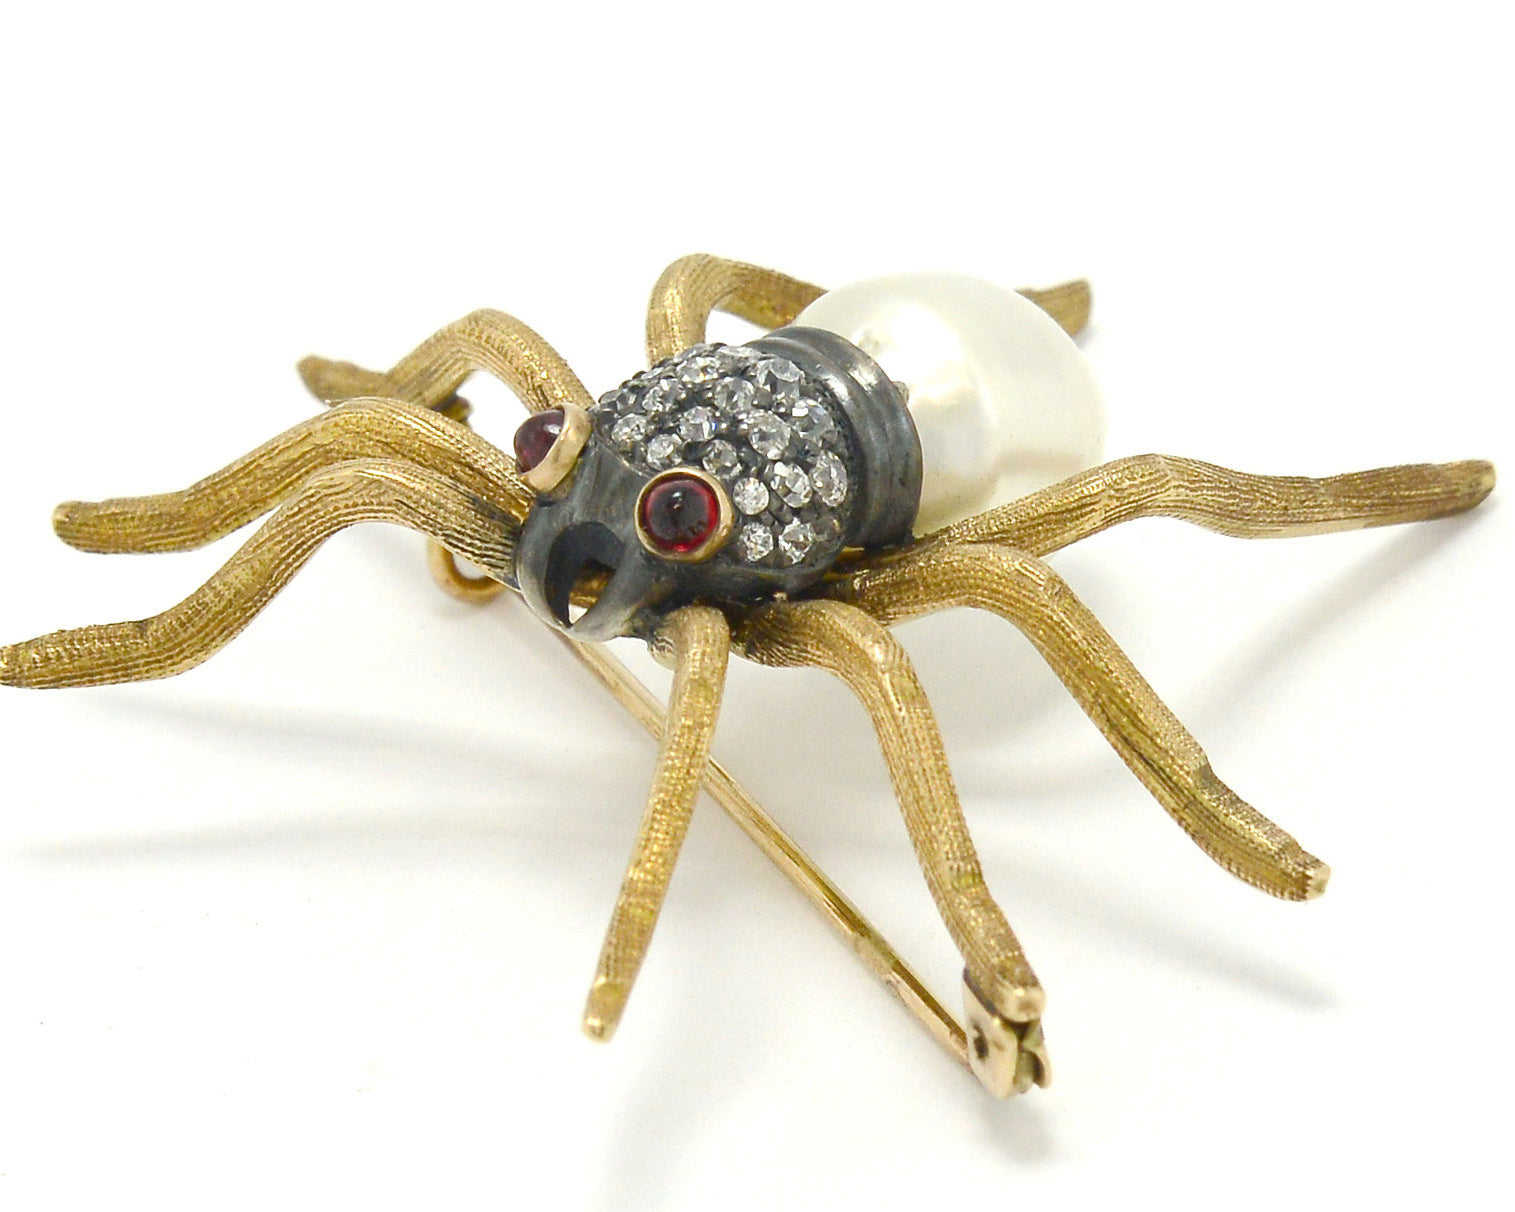 An antique Victorian spider pin made of gold, rubies, diamonds and pearl.